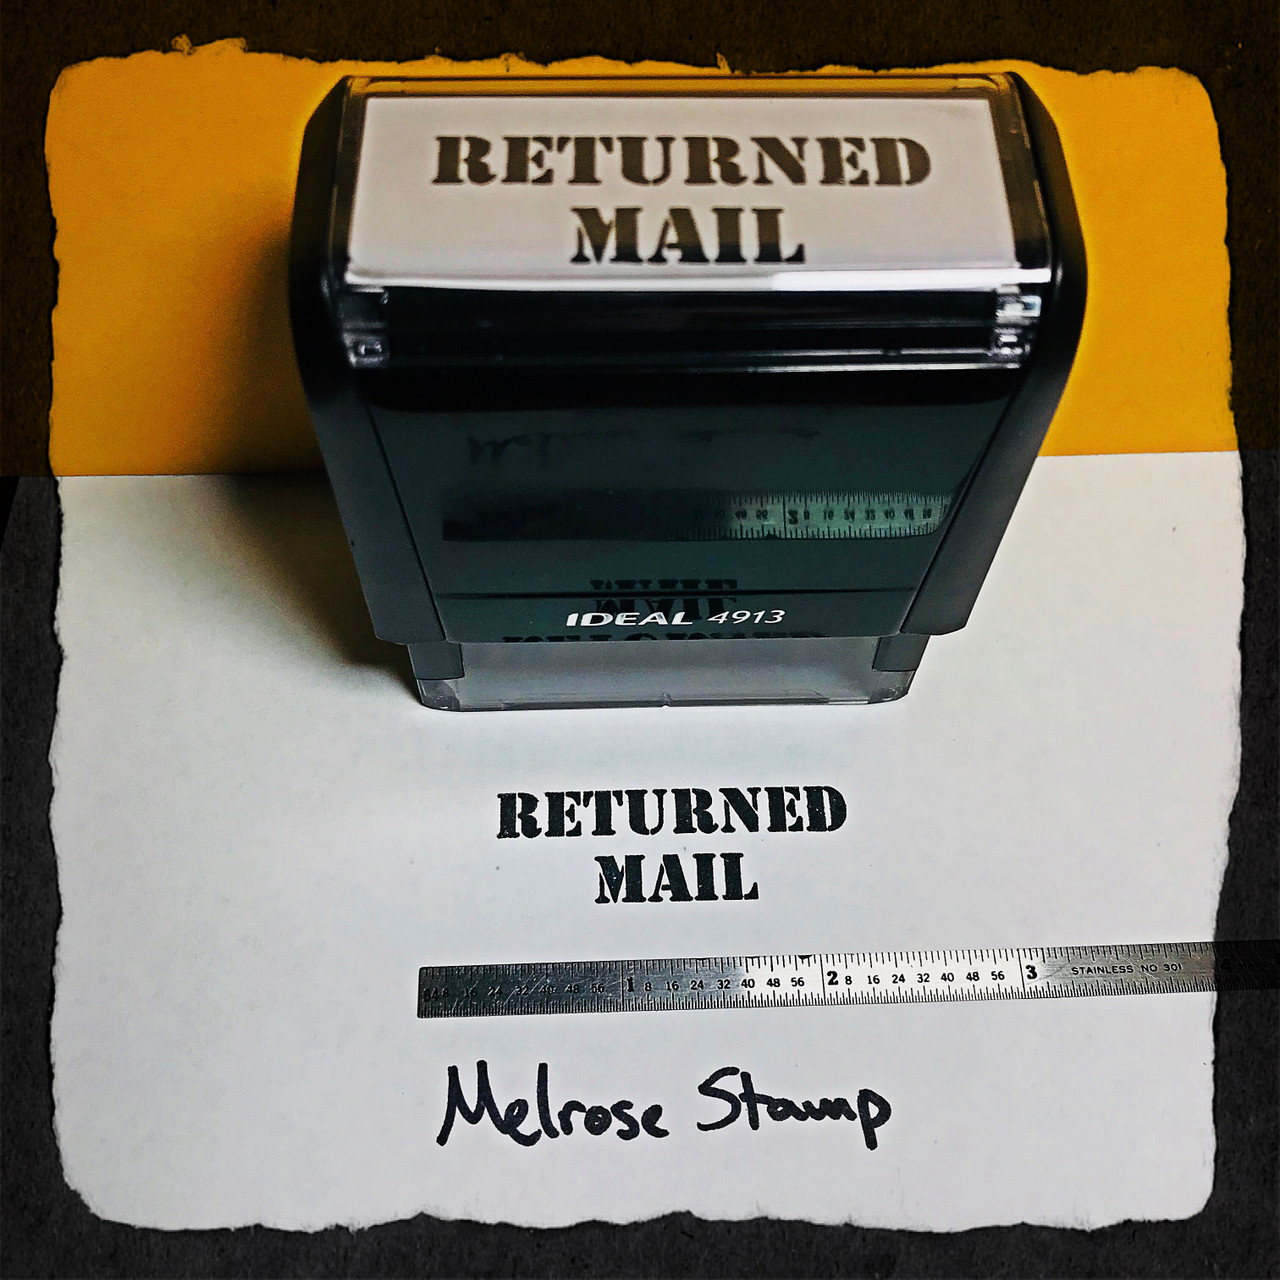 Returned Mail Rubber Stamp For Mail Use Self Inking Melrose Stamp Company 4739